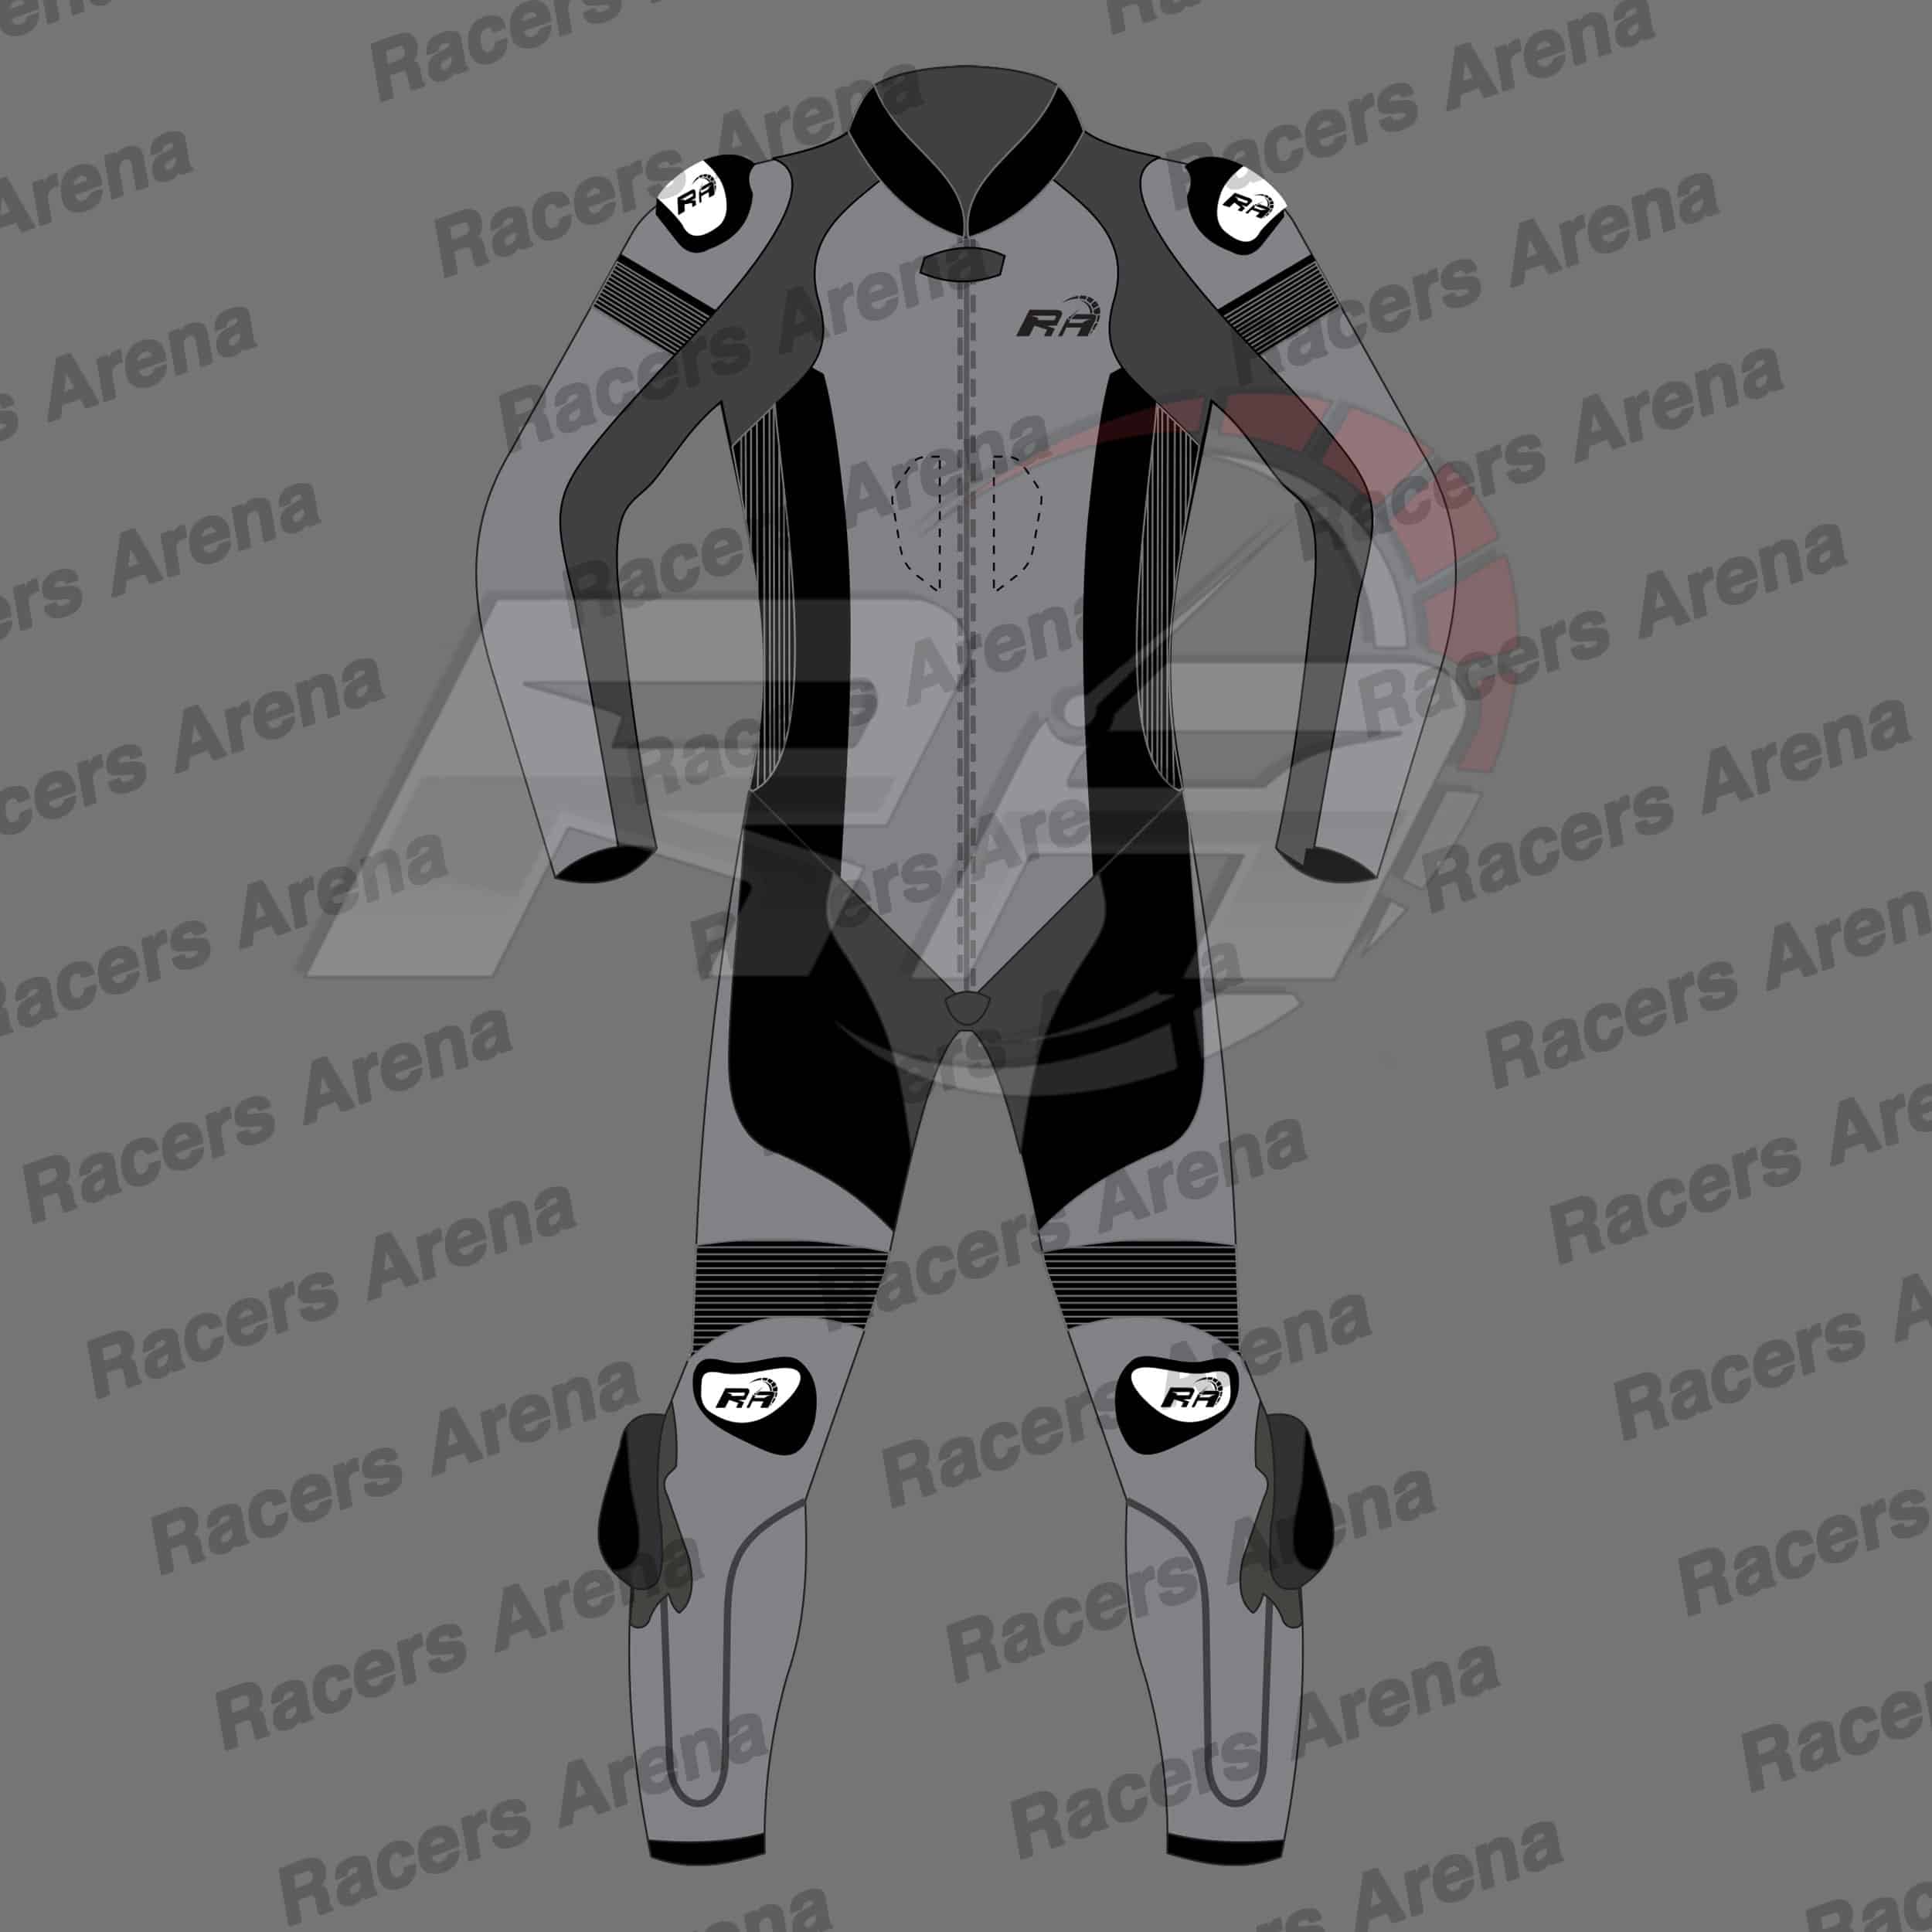 Dyno V1 Leather Race Suit - Racers Arena UK